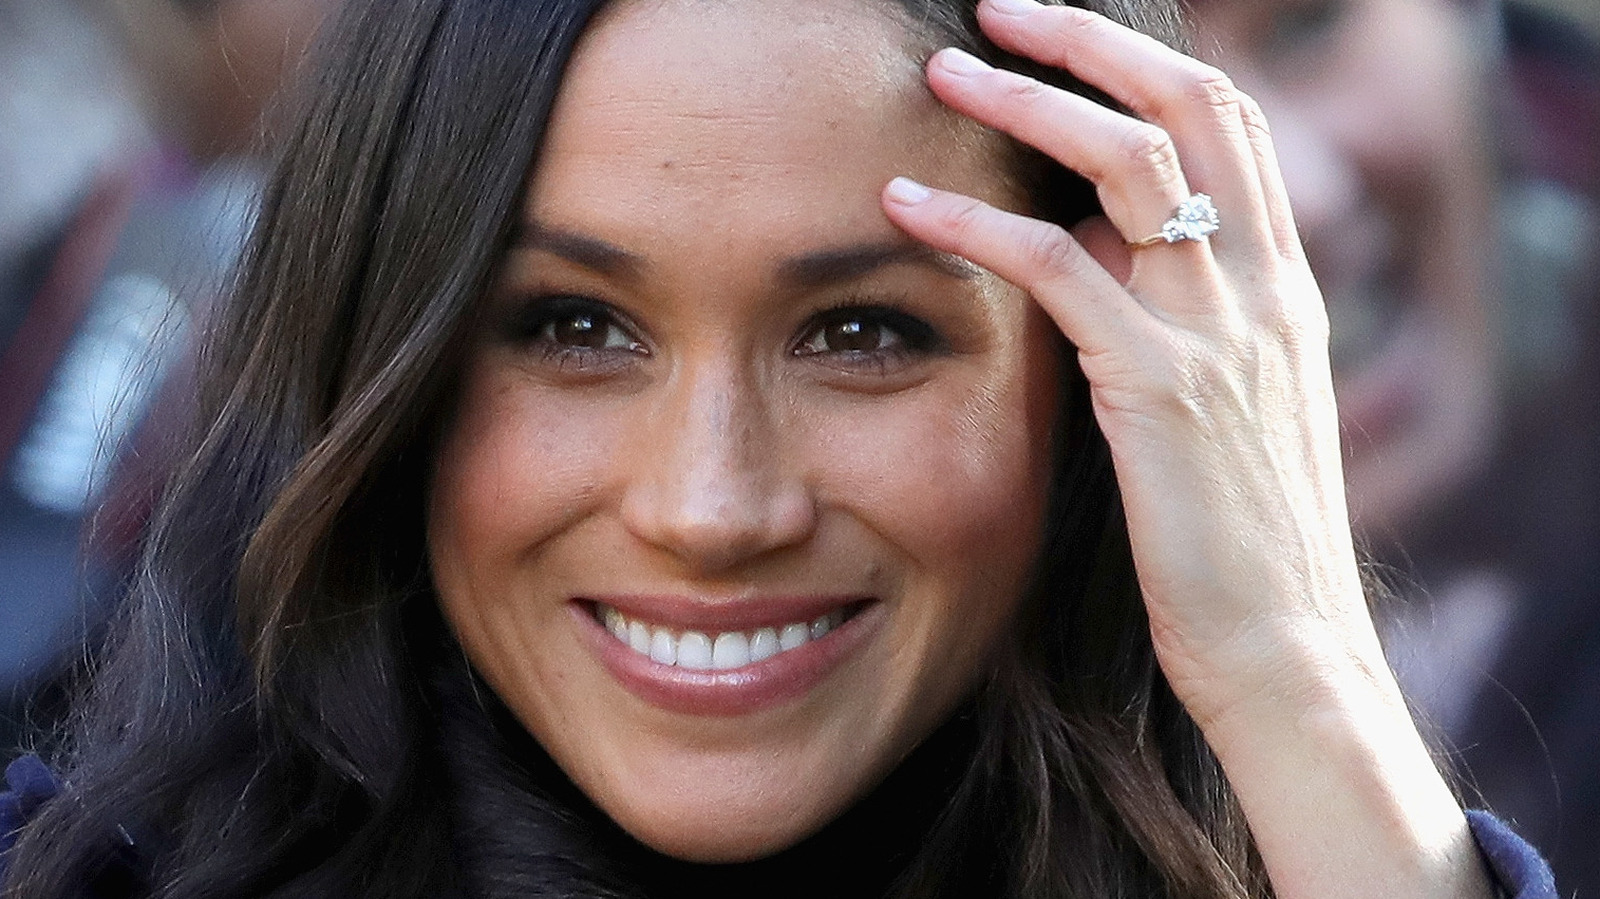 The Word Meghan Markle Said Over 200 Times In Her First Podcast